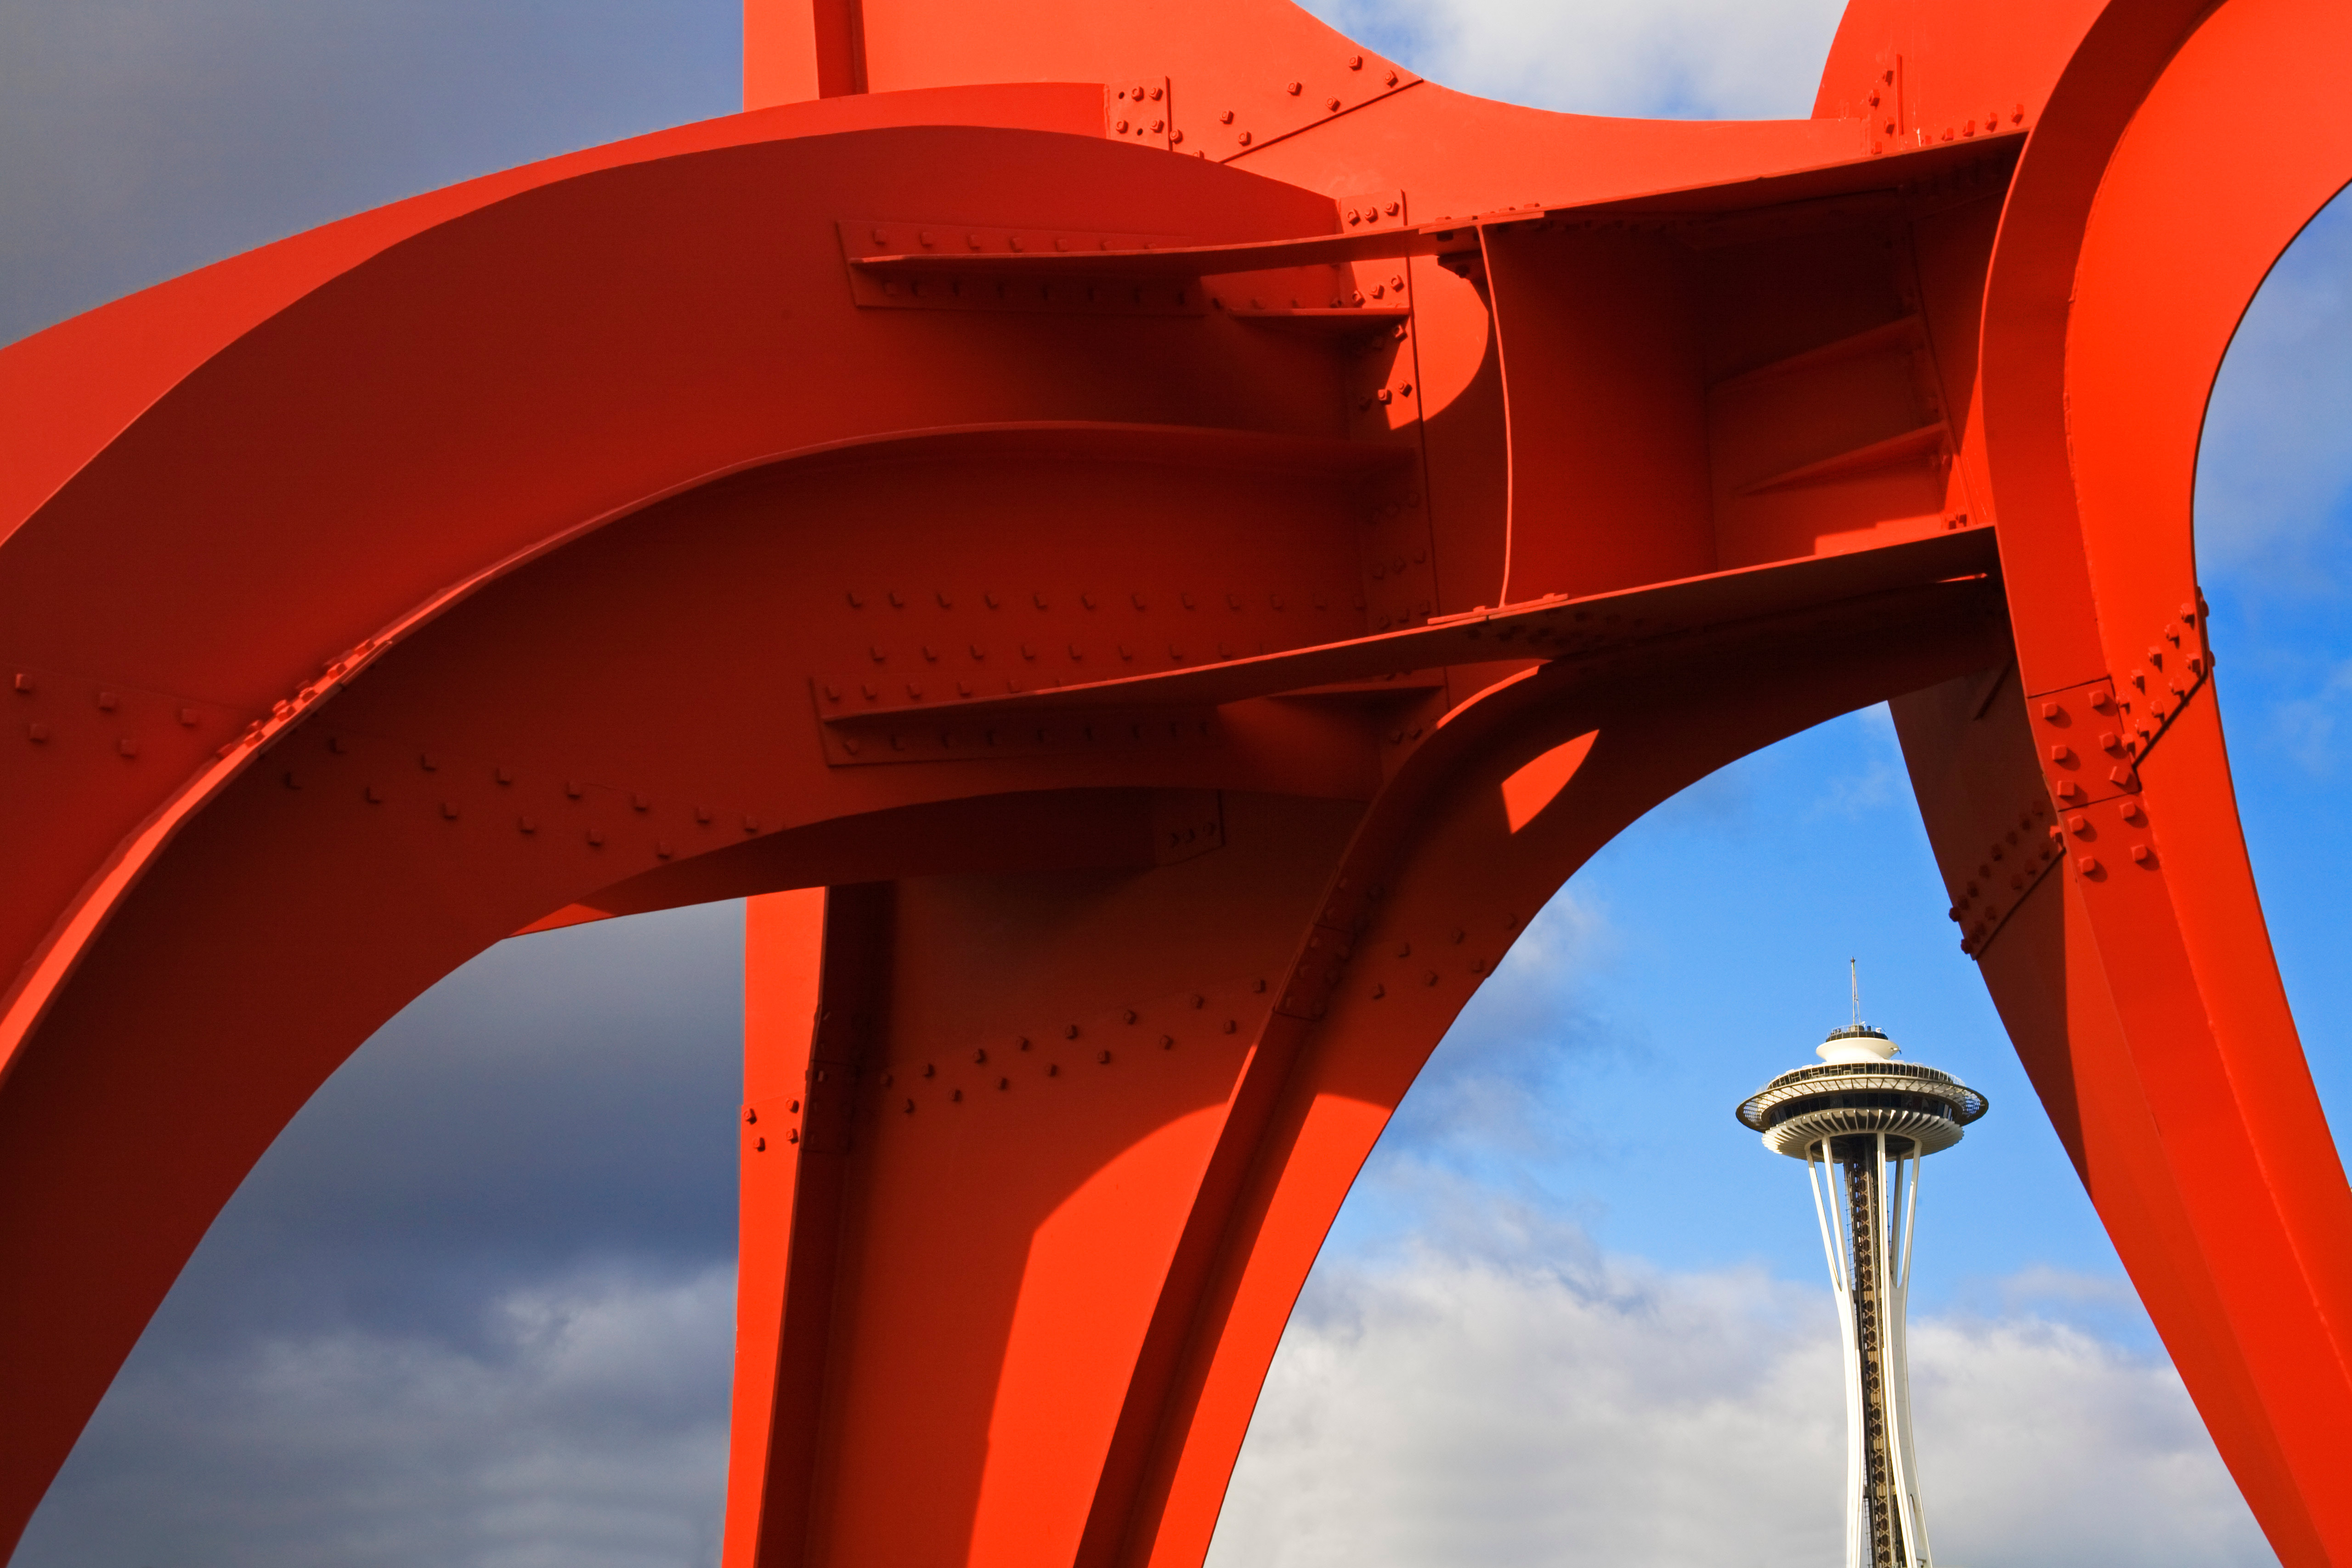 The Eagle with the Space Needle in the background at Olympic Sculpture Park. Image by Richard Cummins / Getty